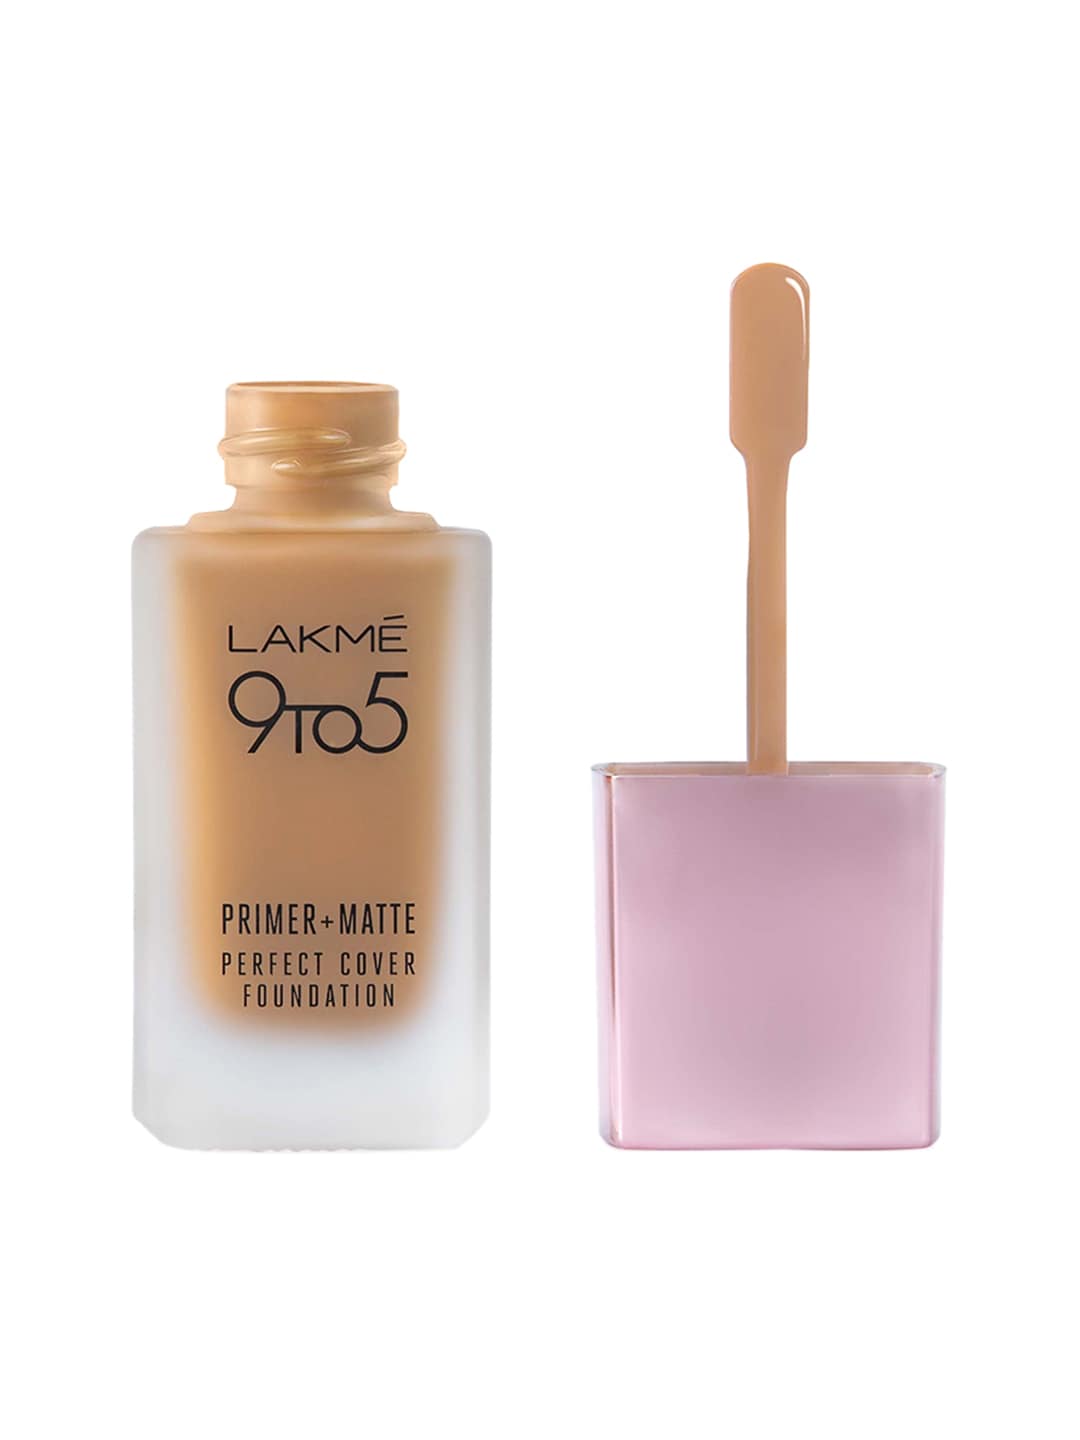 Lakme 9To5 Primer & Matte Perfect Cover Foundation - Neutral Honey N260 25 ml